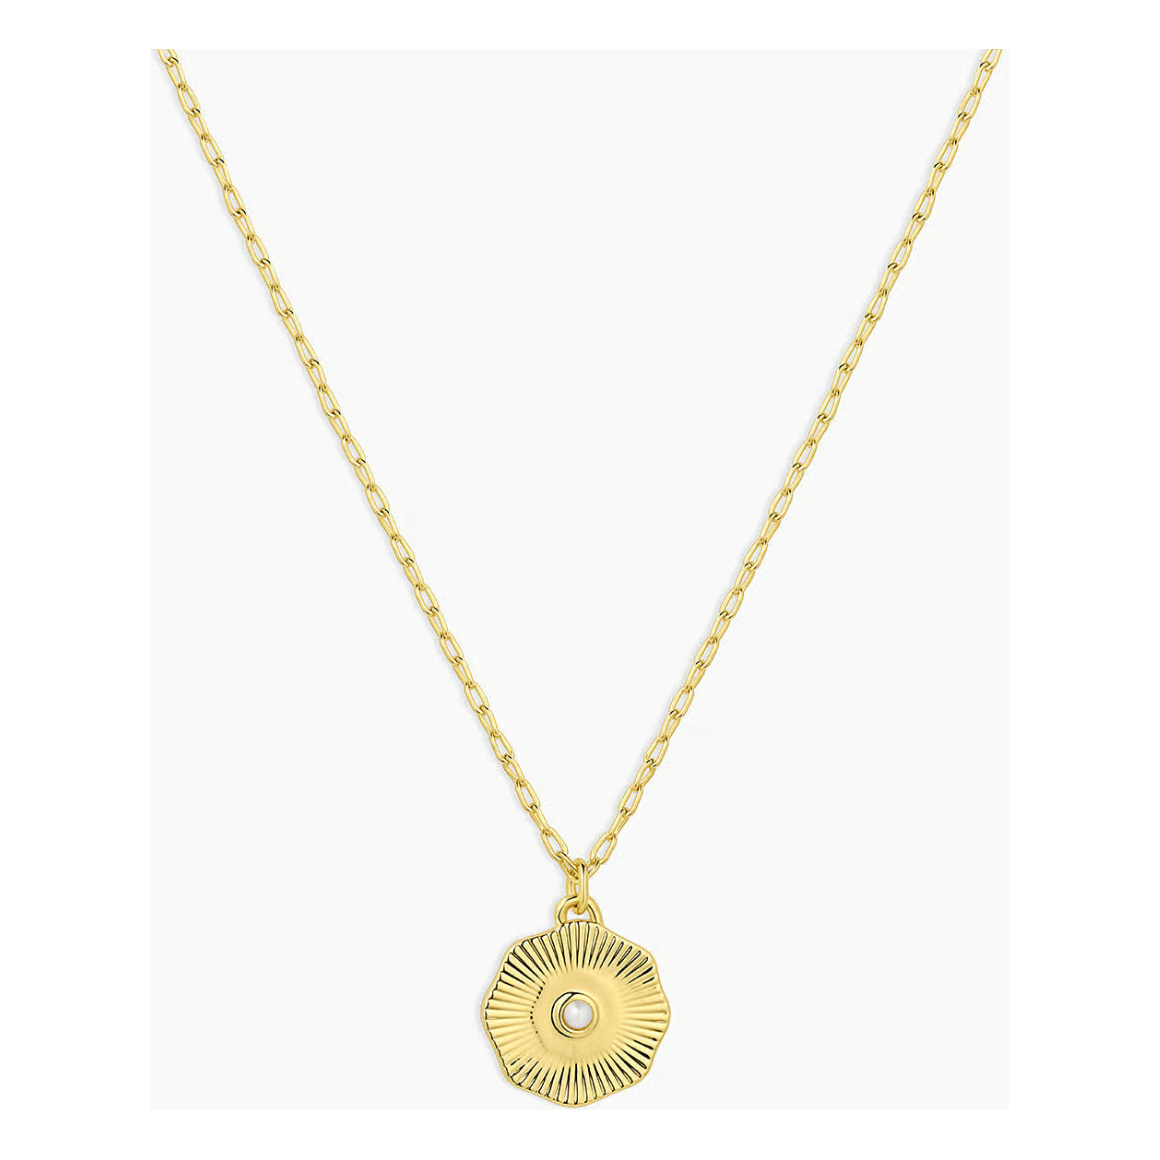 Birthstone Coin Necklace - June